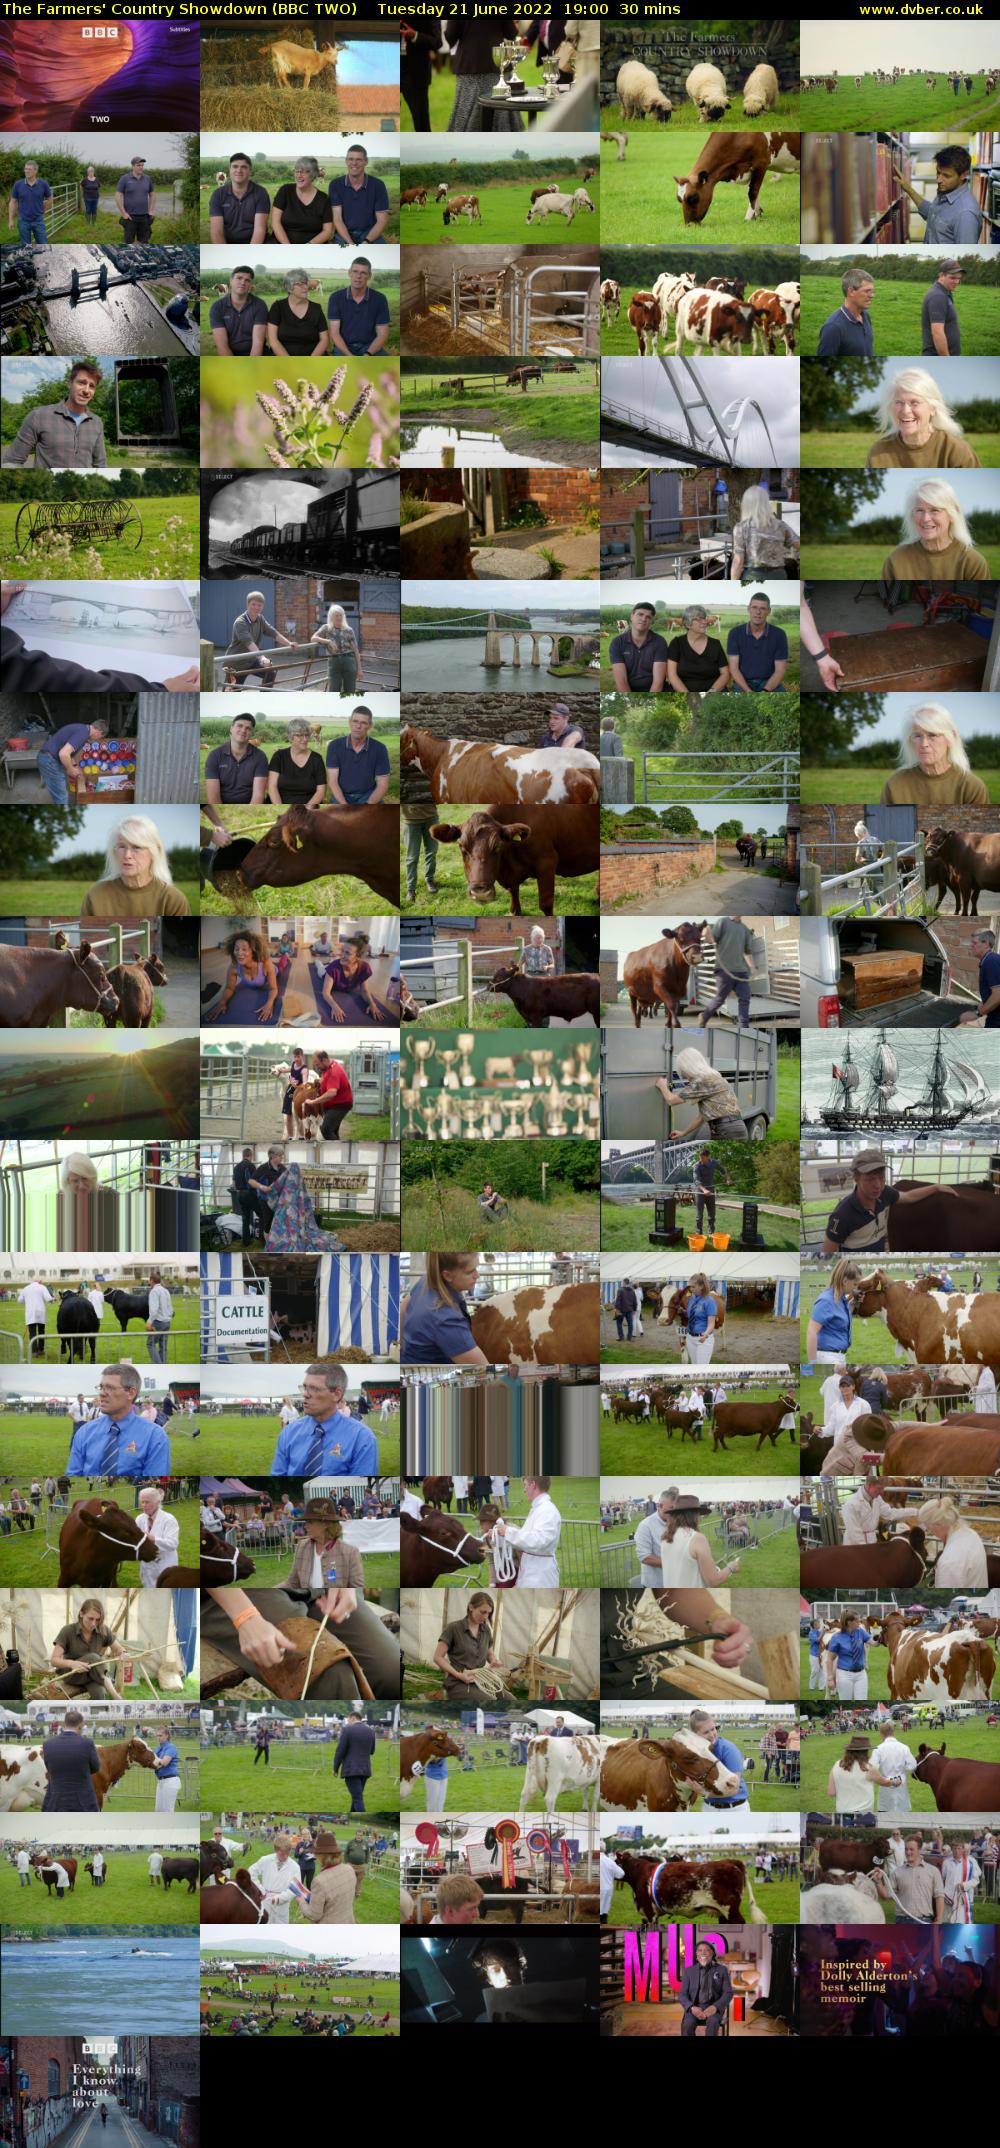 The Farmers' Country Showdown (BBC TWO) Tuesday 21 June 2022 19:00 - 19:30